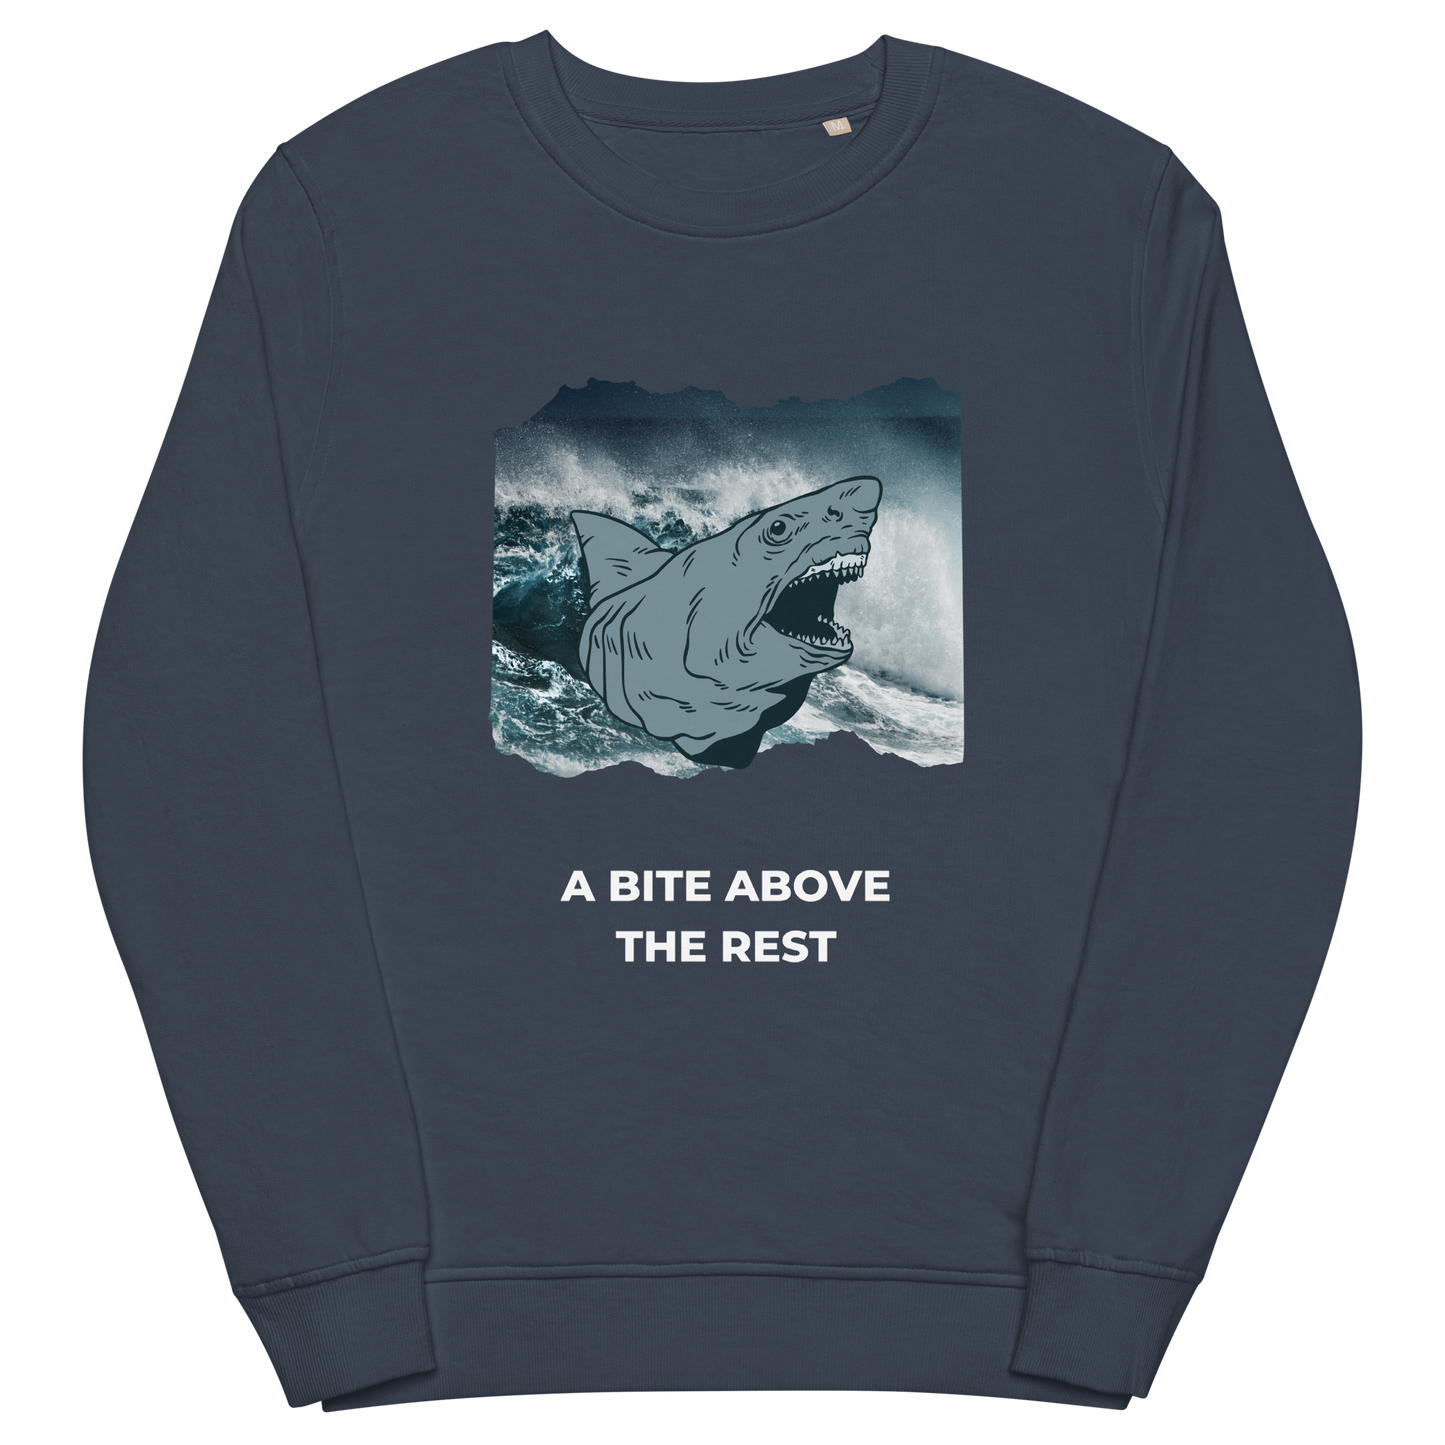 French Navy Organic Cotton Megalodon Sweatshirt featuring the jaw-dropping 'A Bite Above the Rest' graphic on the chest - Funny Graphic Megalodon Sweatshirts - Boozy Fox